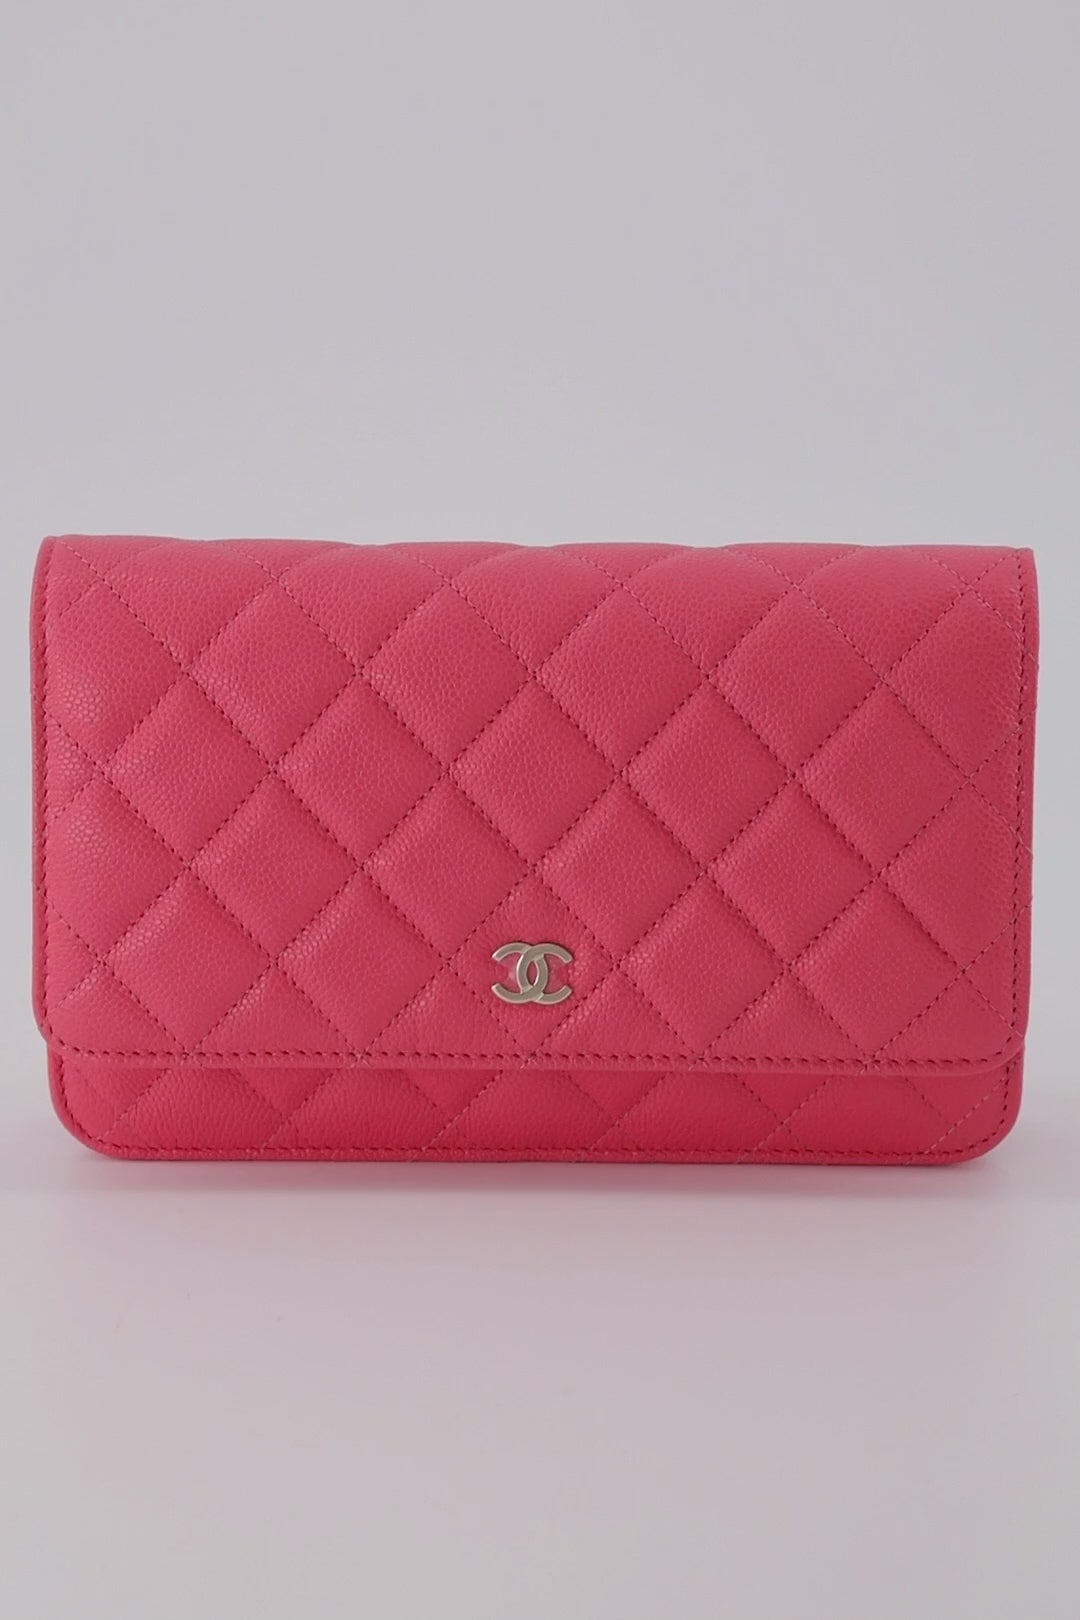 Chanel Pink Classic Quilted Wallet Bag